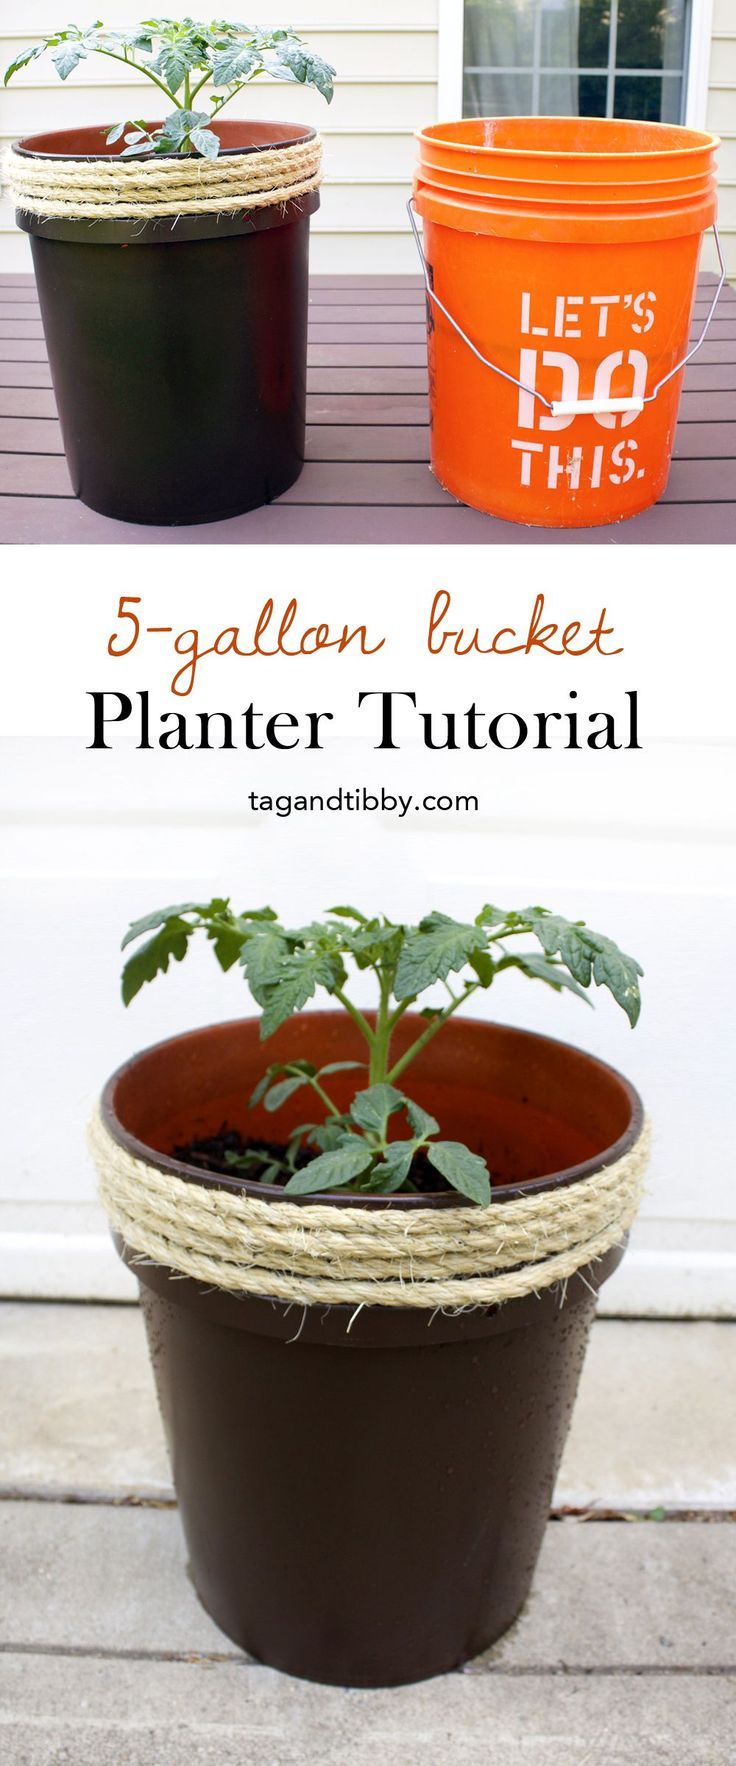 How to Make a Planter From a 5 Gallon Bucket